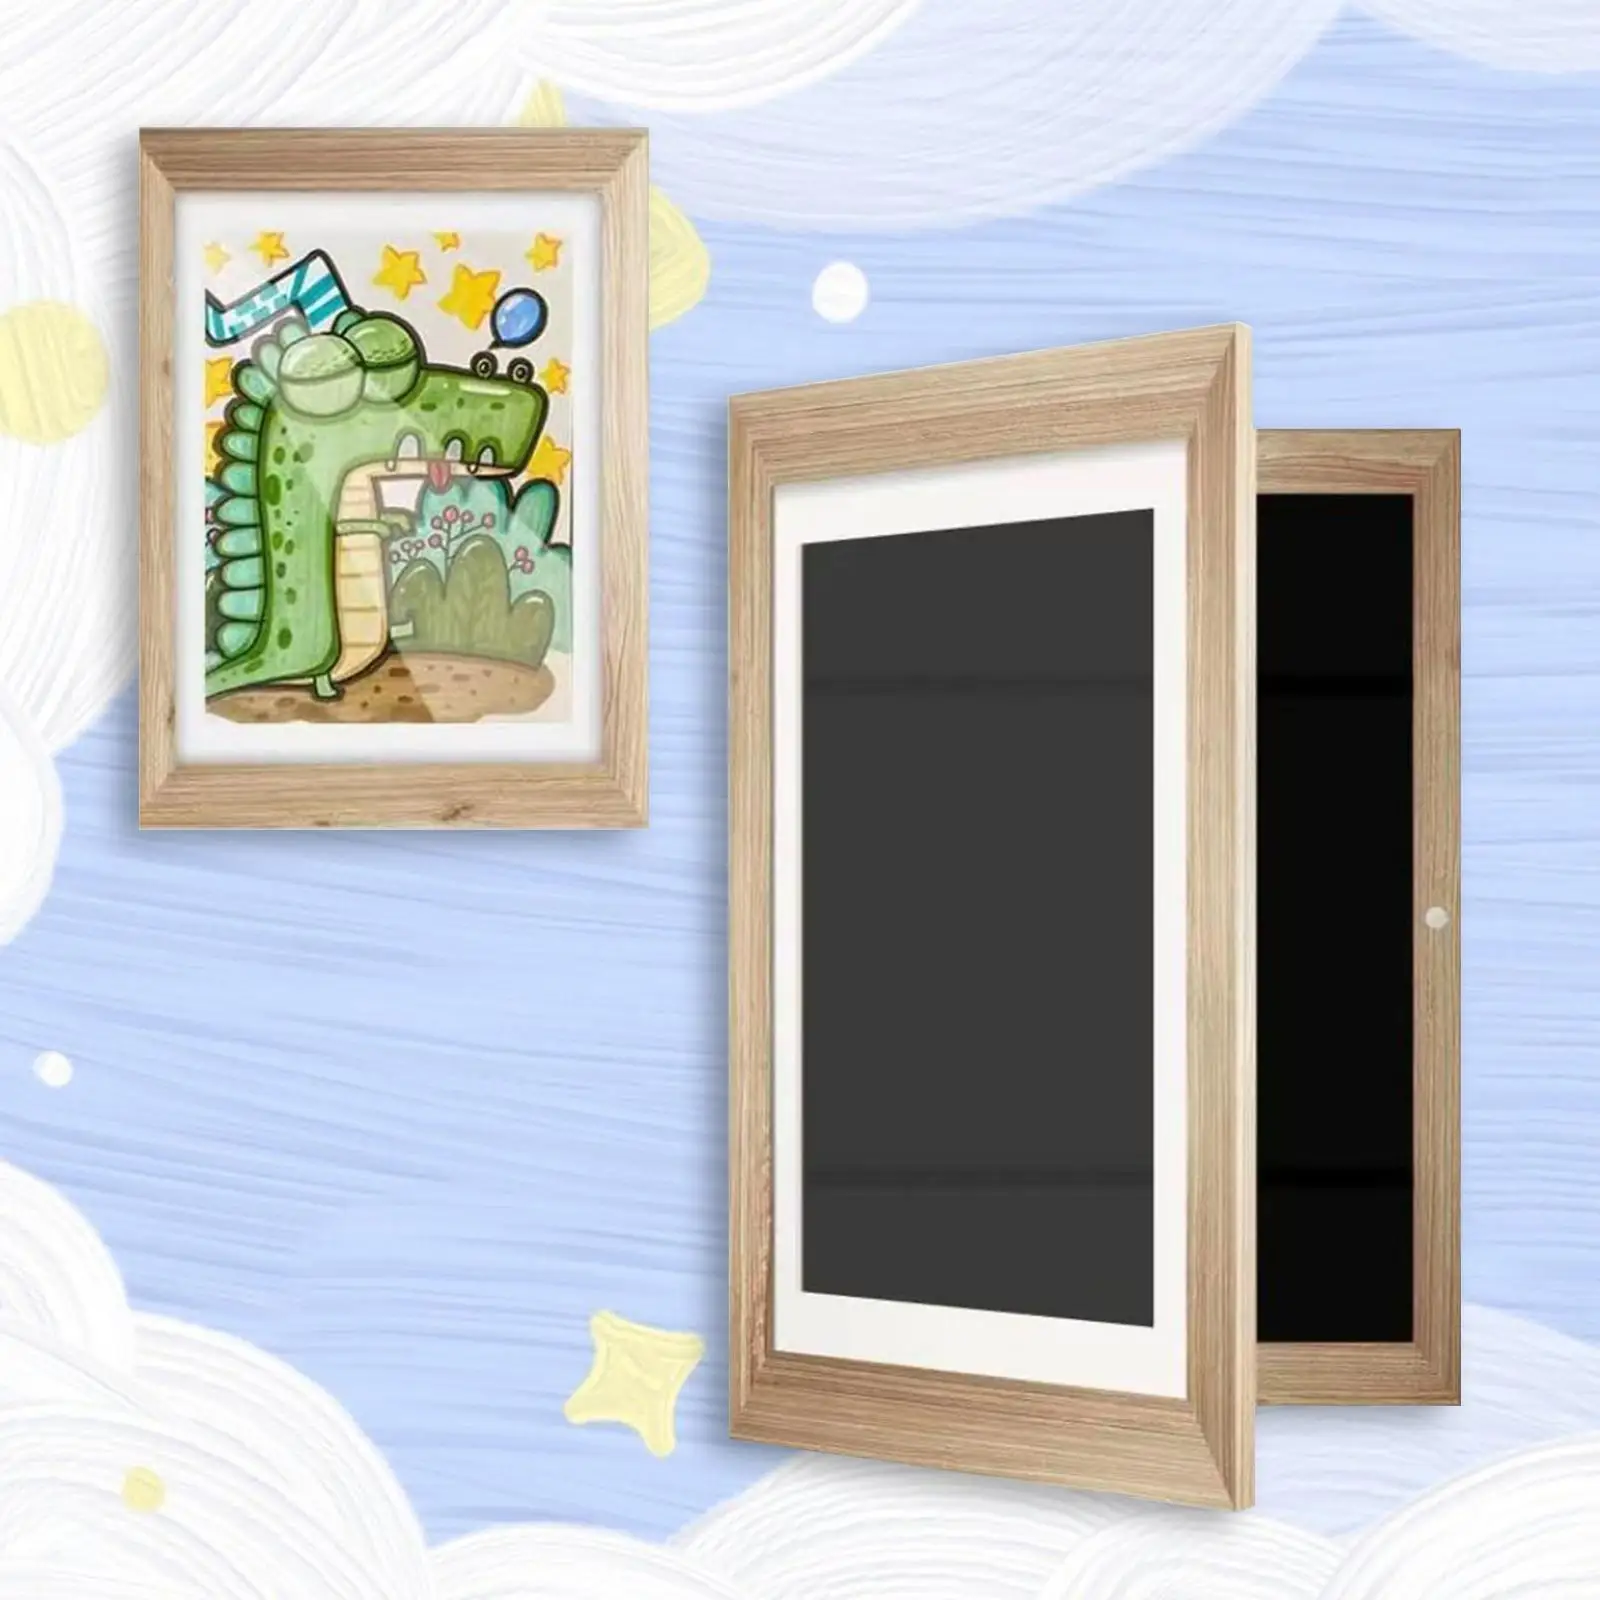 Frame Display Storage Picture Frame Changeable for Schoolwork Collectibles